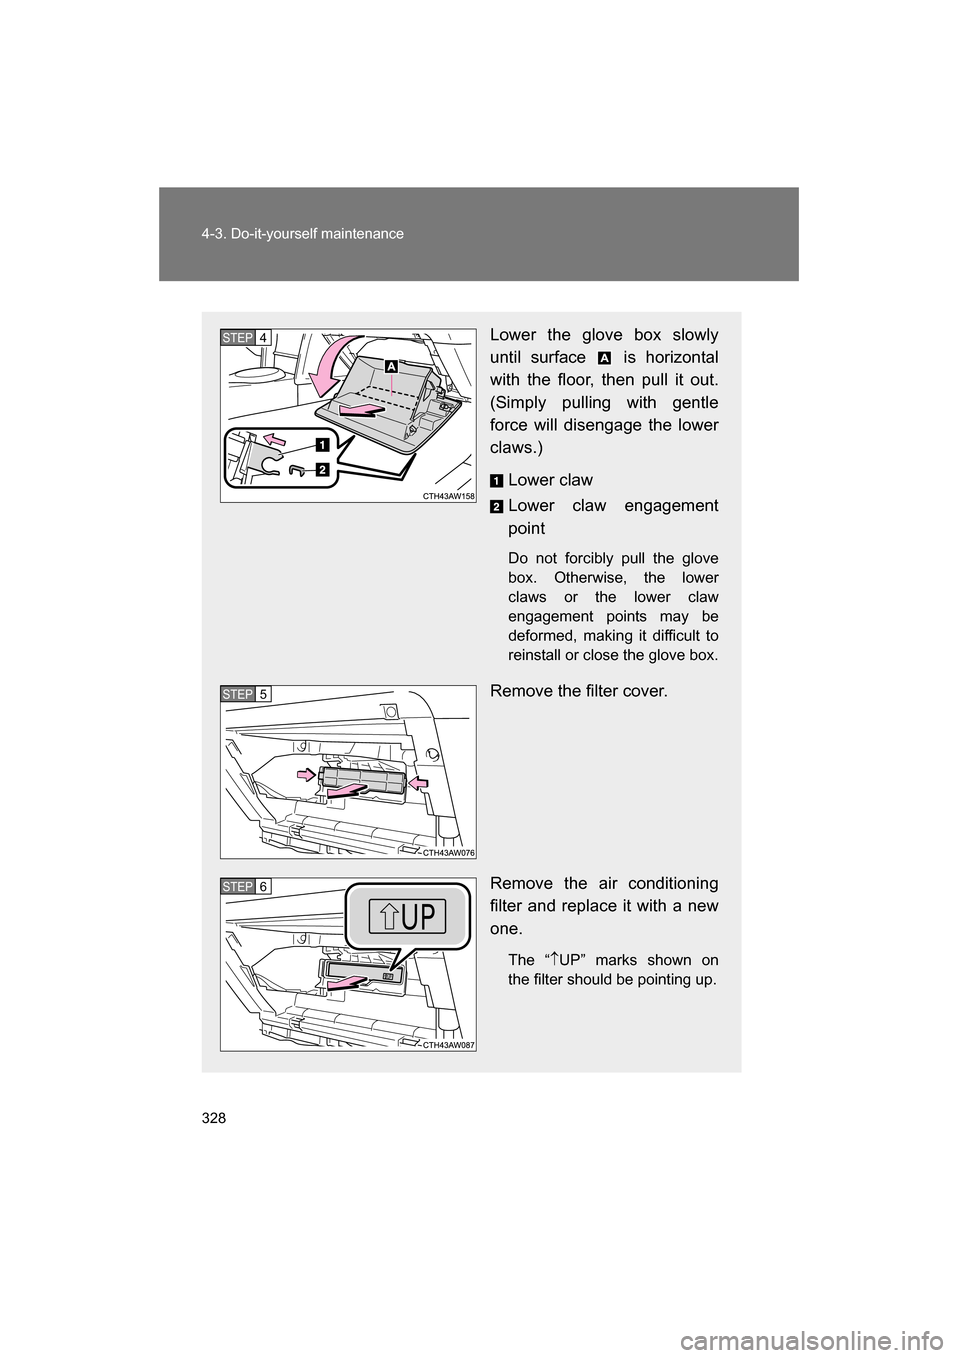 SUBARU BRZ 2015 1.G Owners Manual 328
4-3. Do-it-yourself maintenance
Lower the glove box slowly 
until surface   is horizontal 
with the floor, then pull it out.
(Simply pulling with gentle 
force will disengage the lower 
claws.)Low